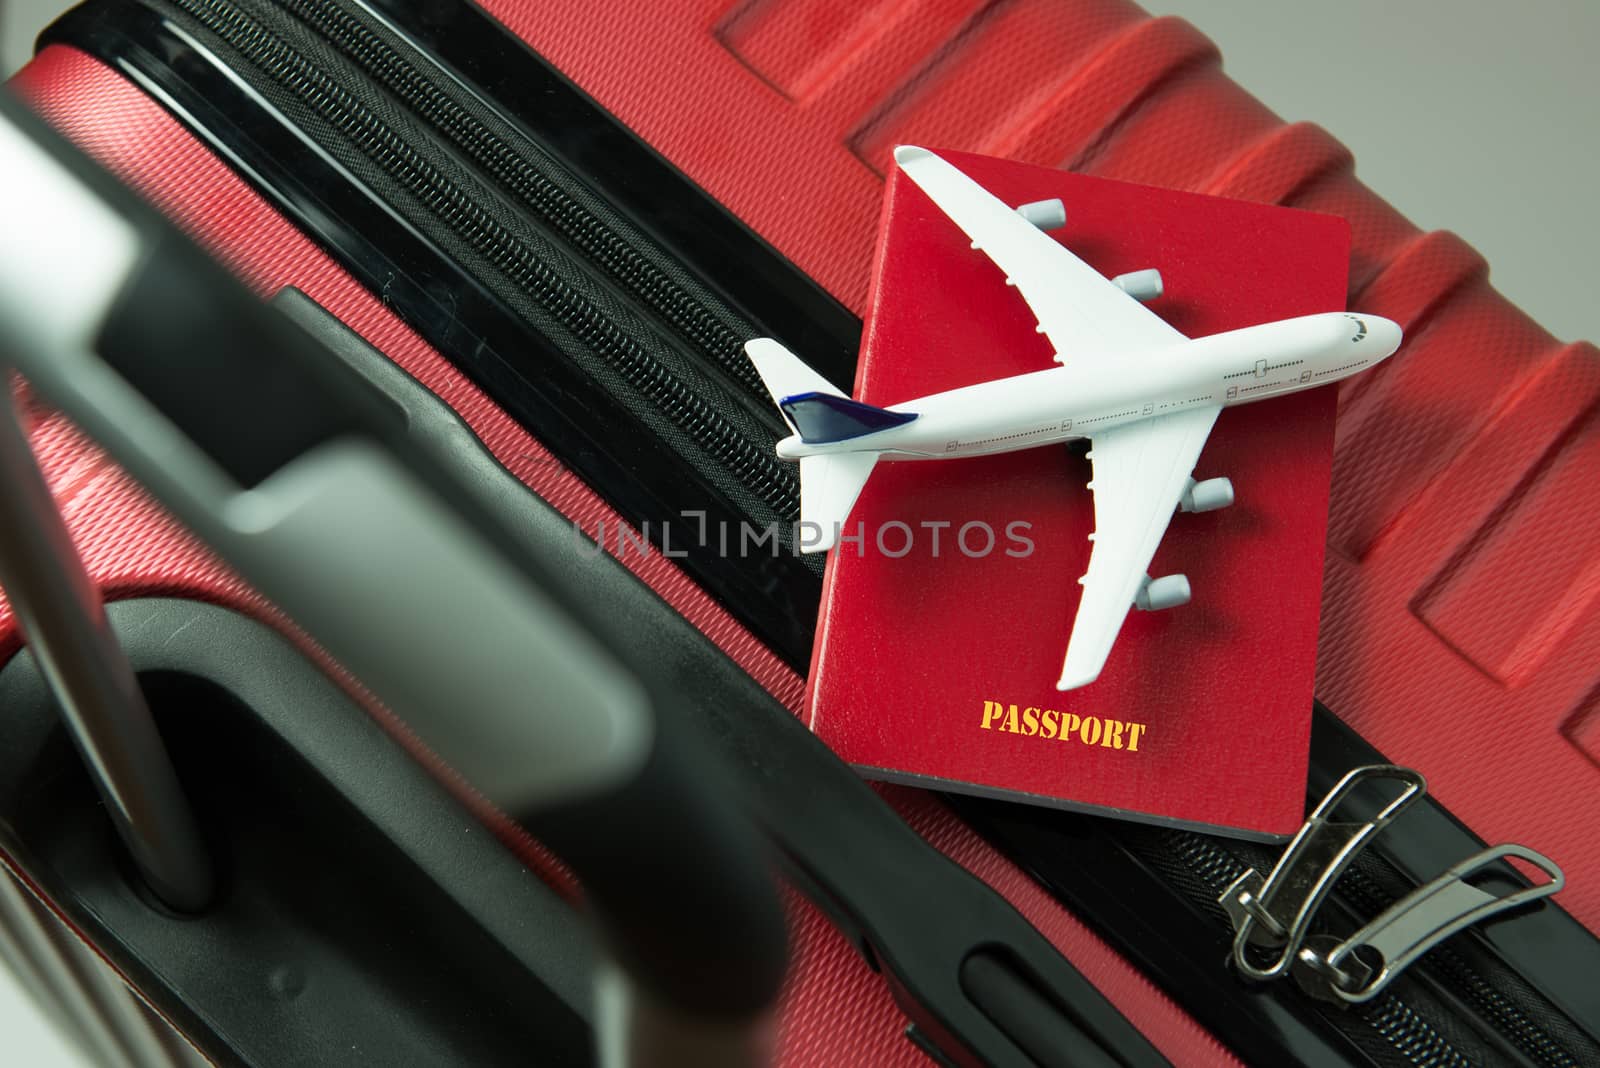 Red passport and airplane model on red luggage by Kenishirotie